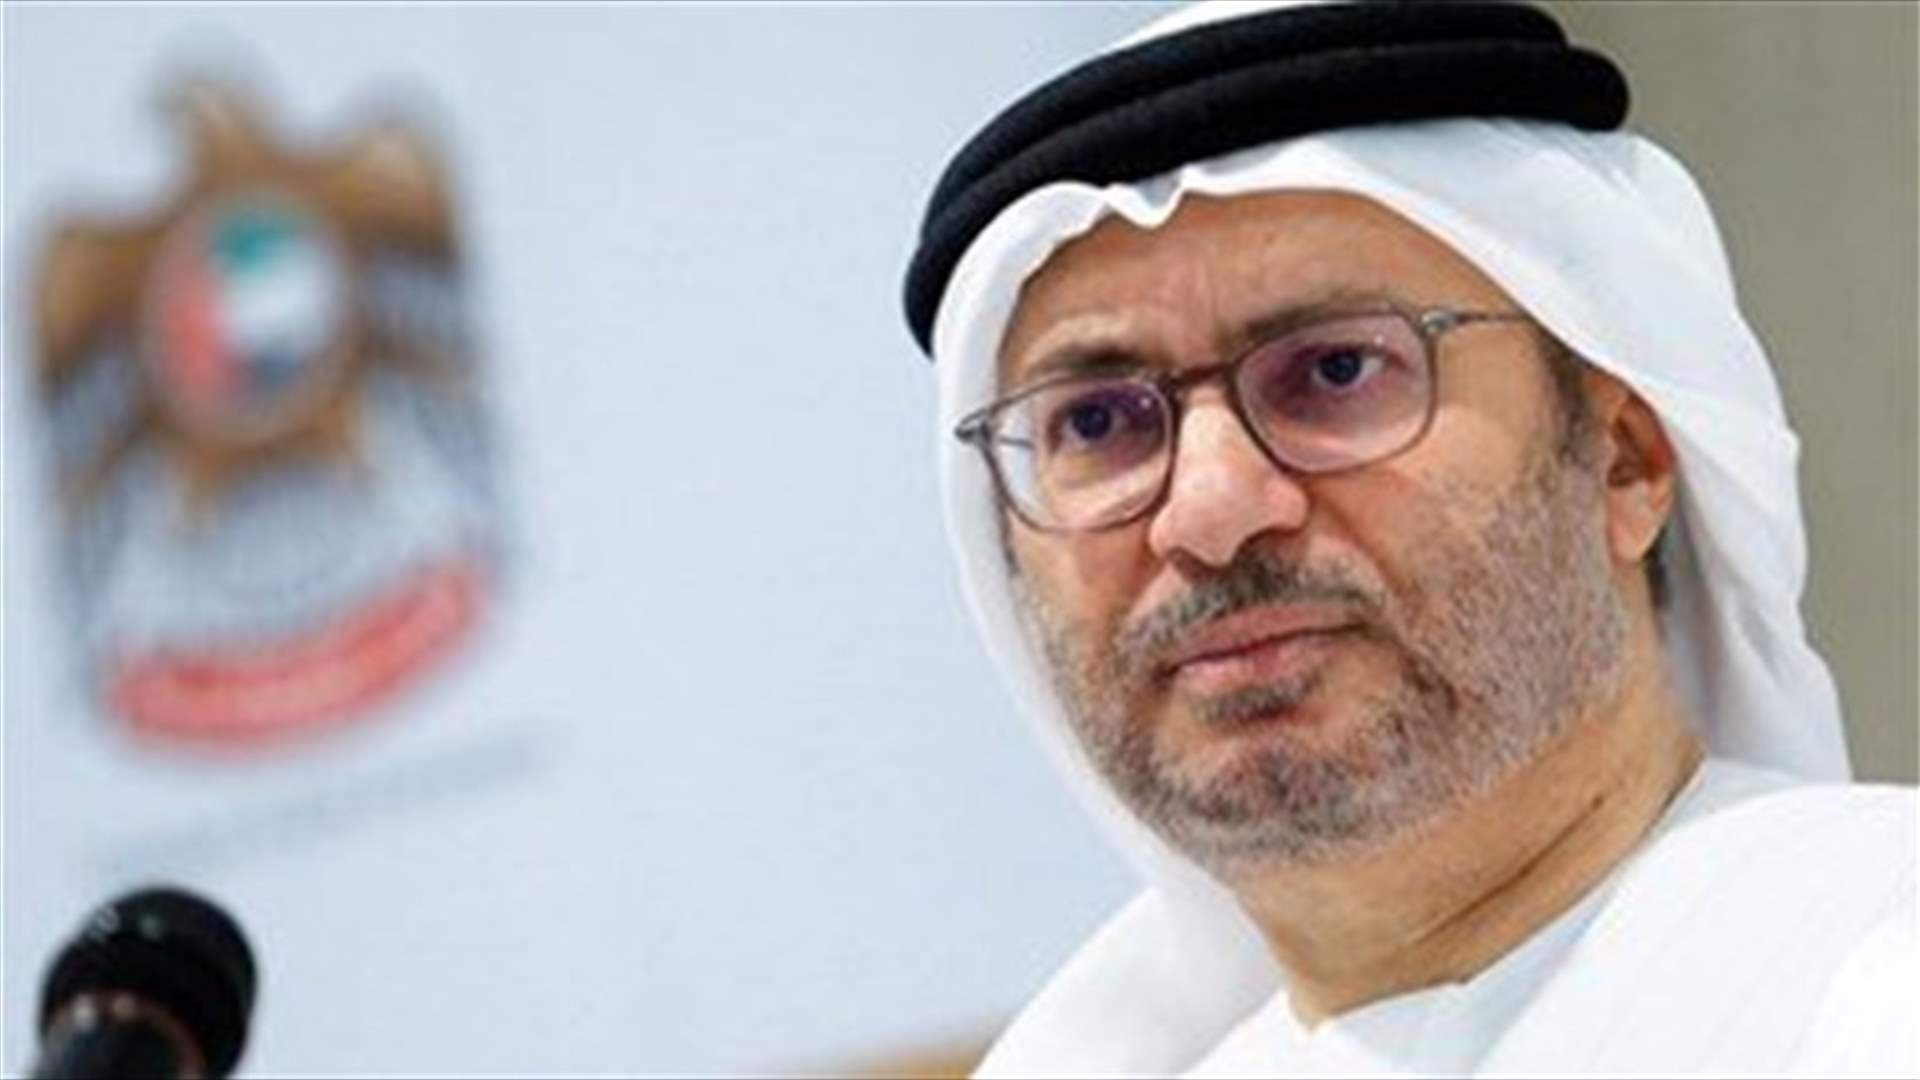 UAE against unilateral changes to situation in Yemen - official